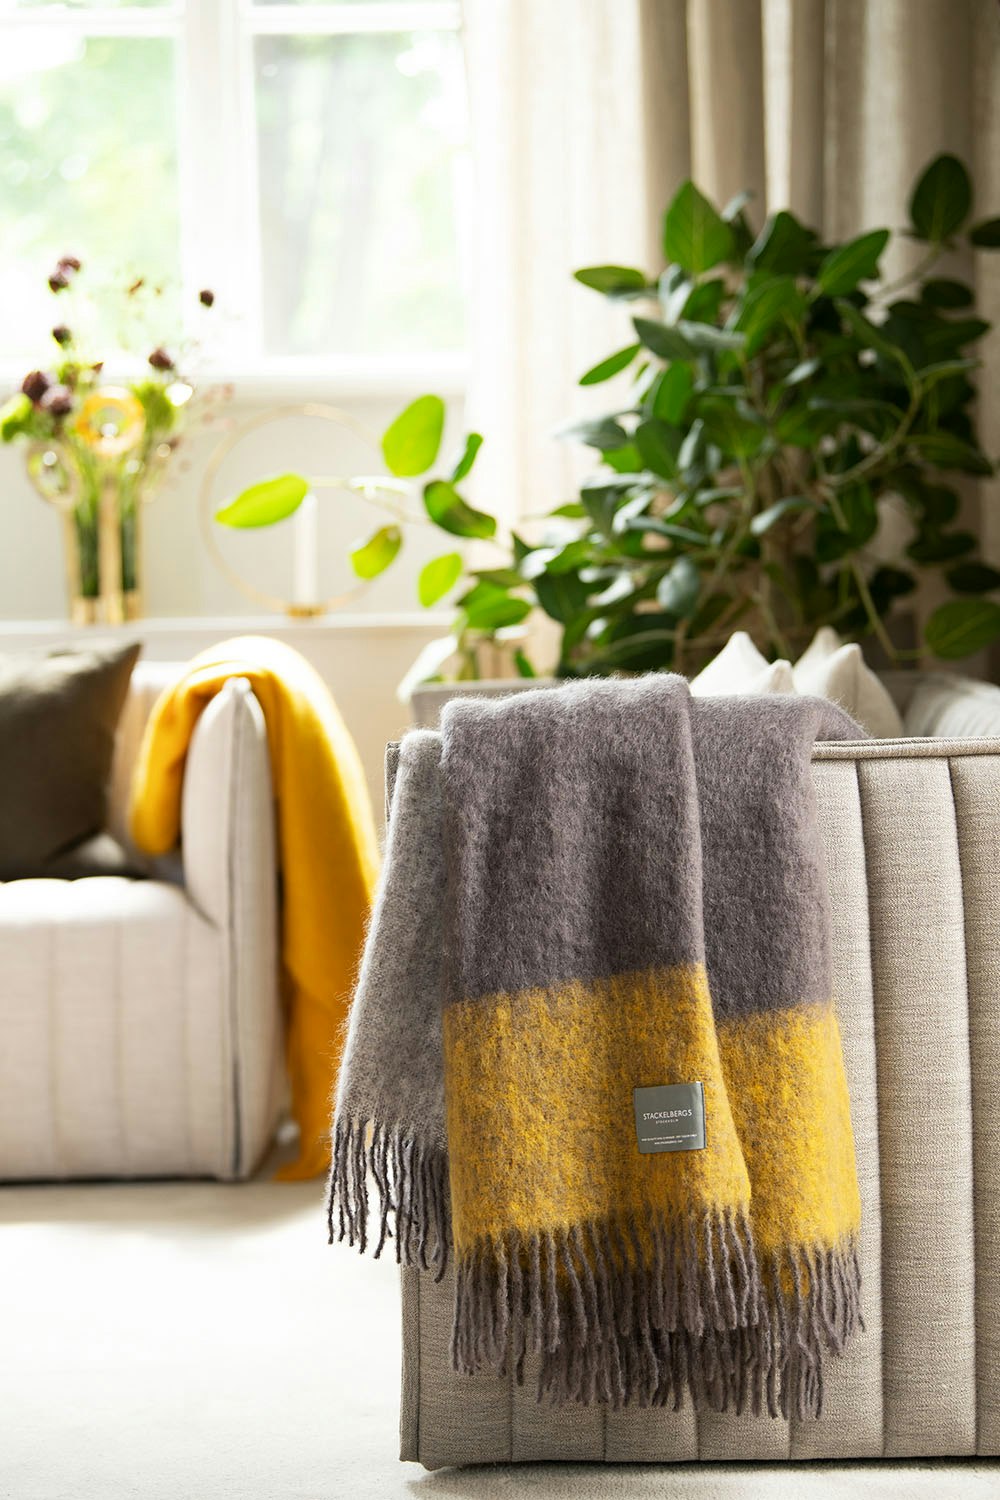 https://royaldesign.com/image/2/stackelbergs-mohair-striped-blanket-mustard-charcoal-130x170-cm-1?w=800&quality=80